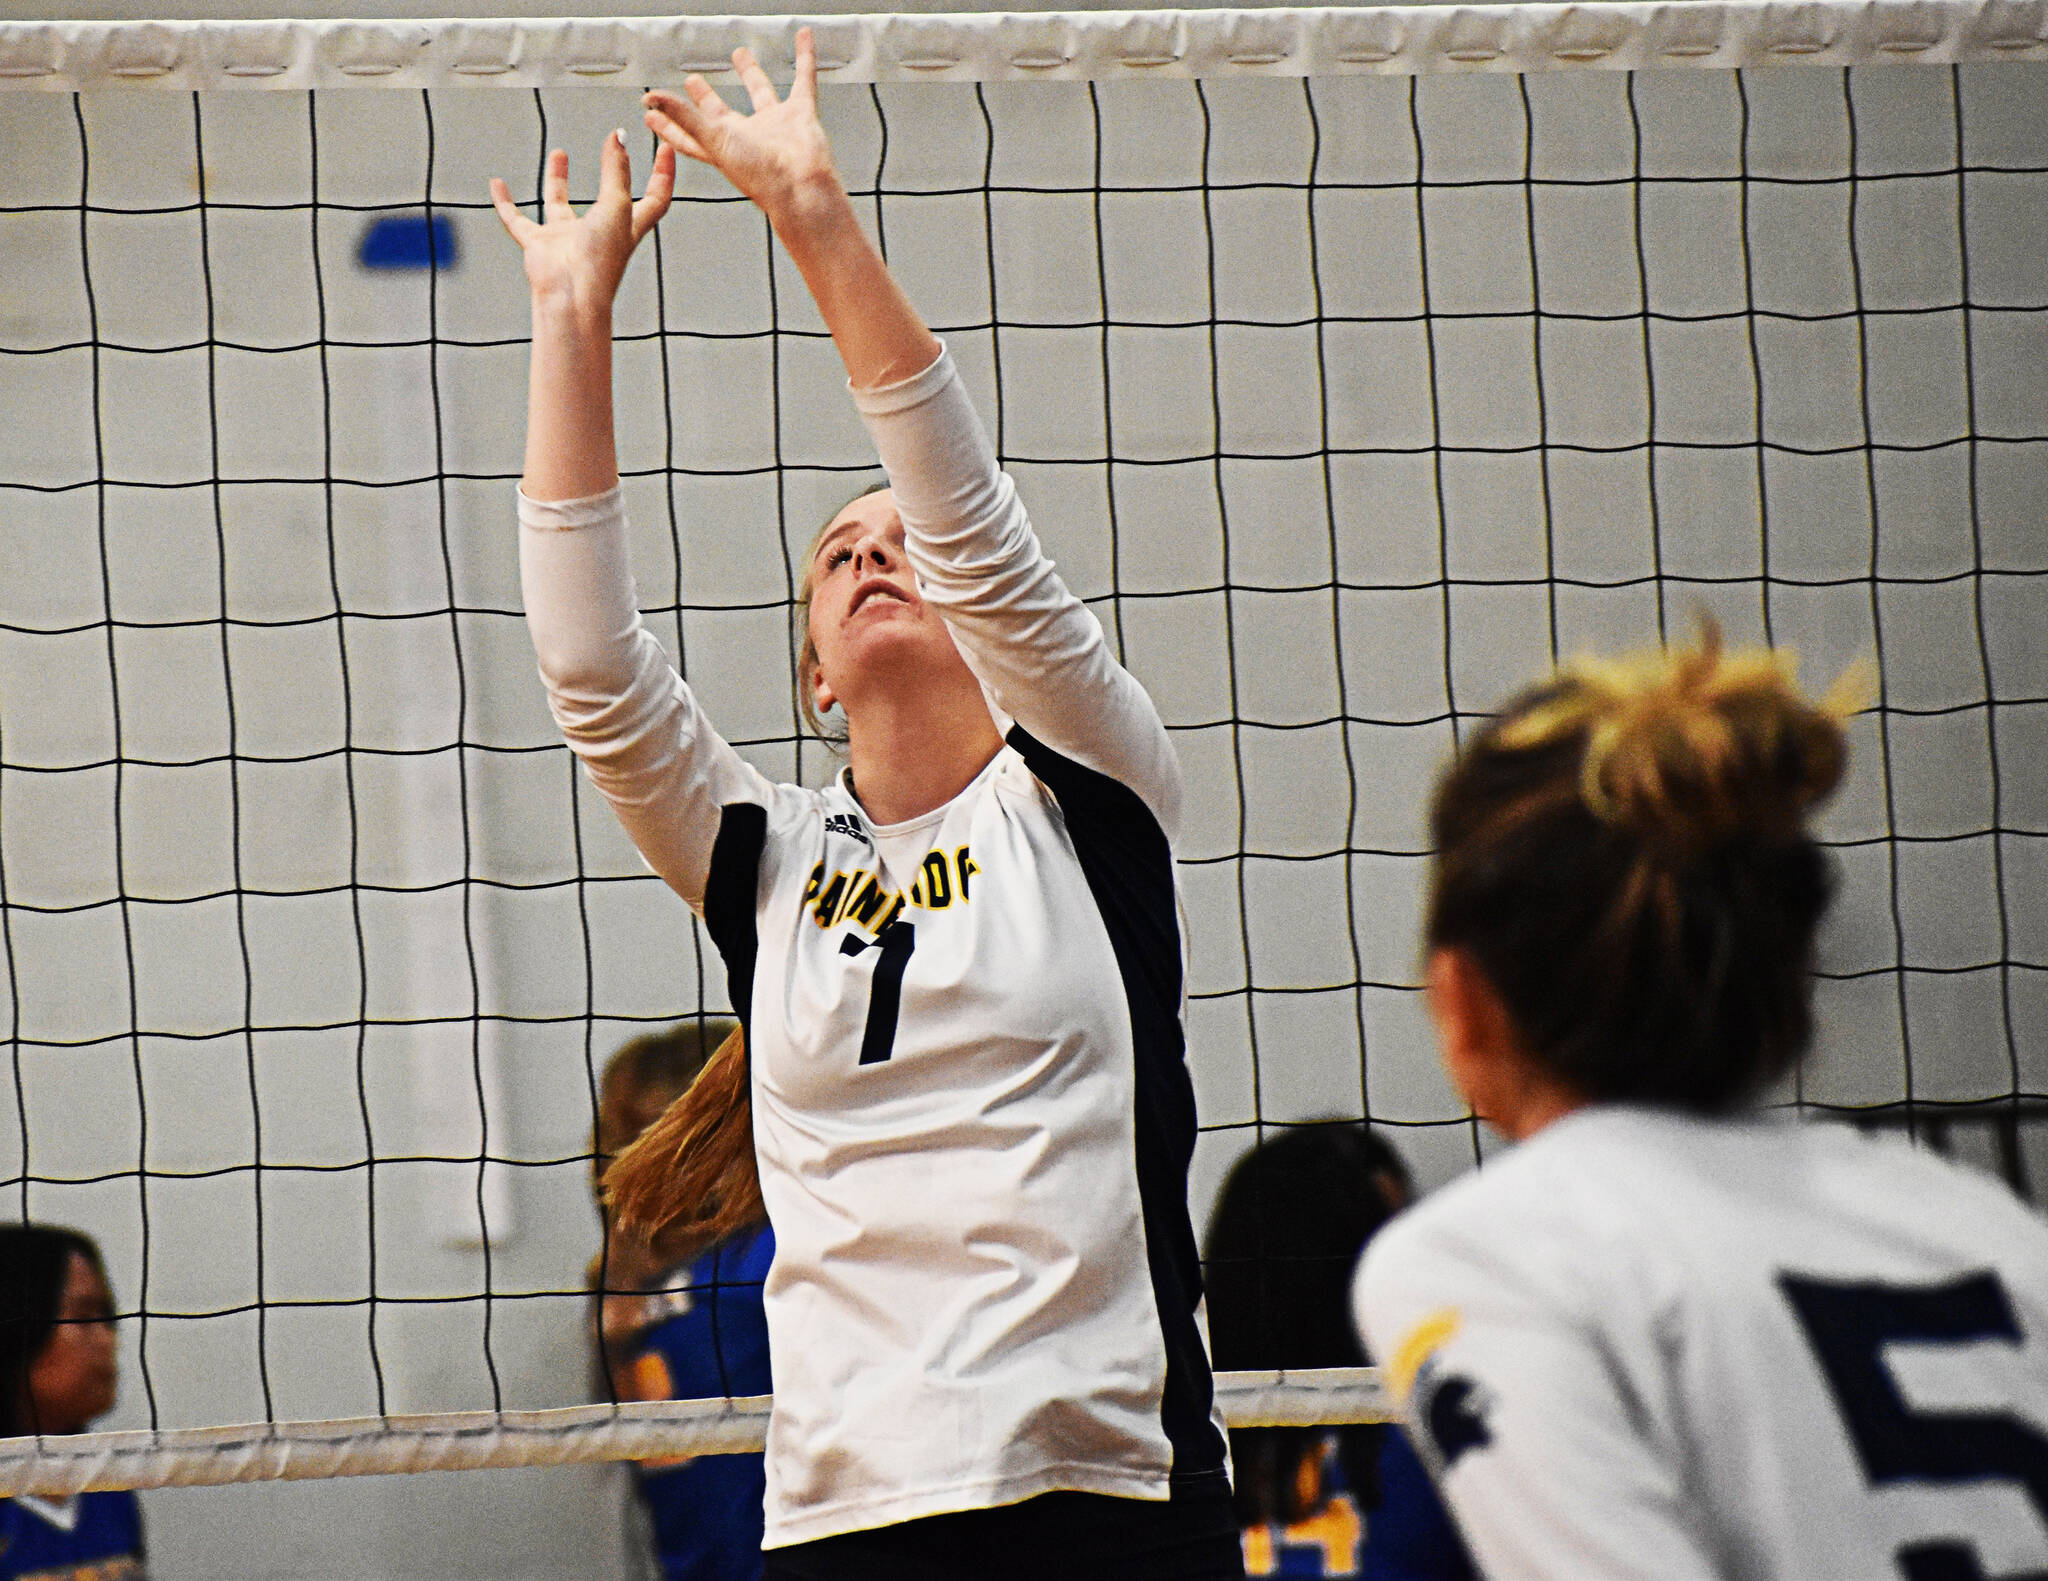 Emma Adcock helped set up the middle blockers for several kills against the smaller Bremerton squad.